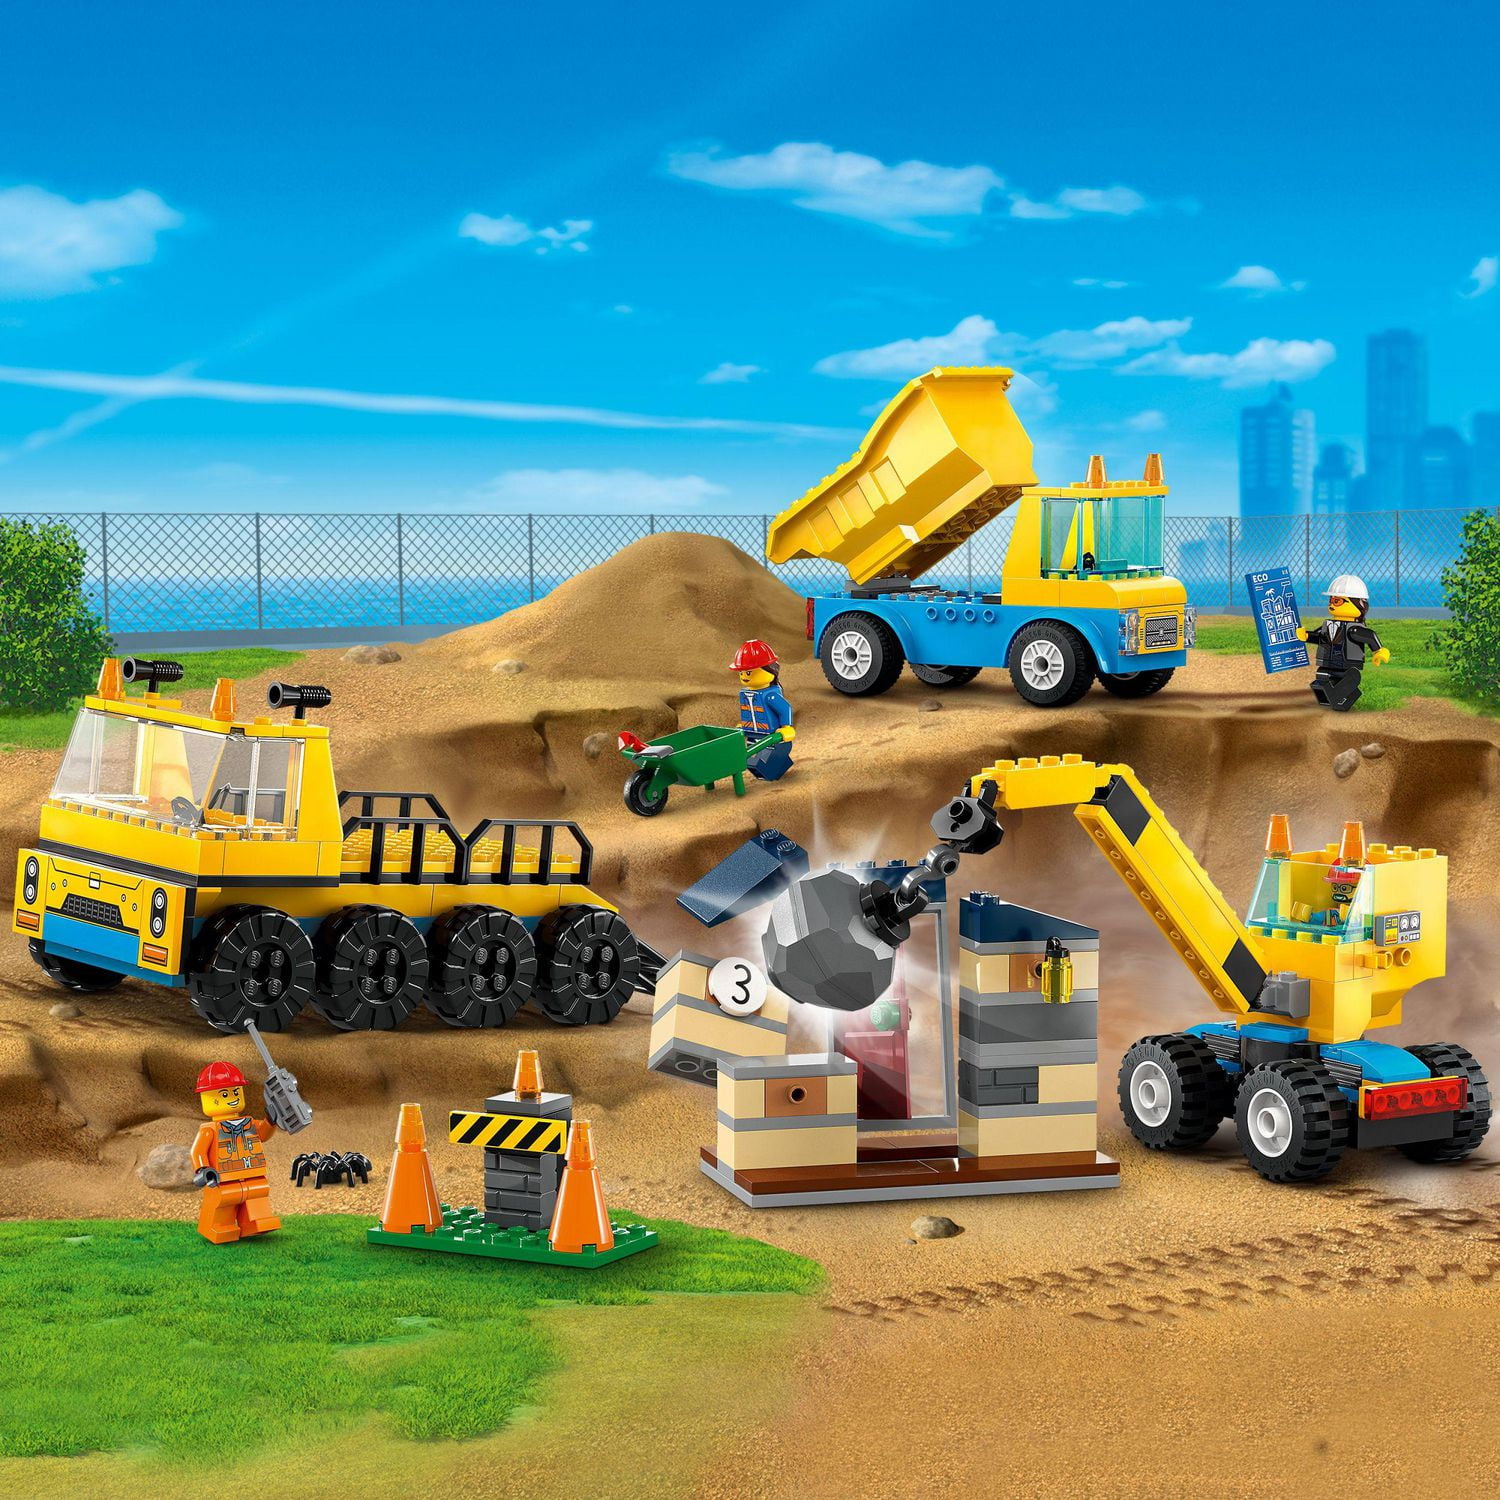 LEGO City Construction Trucks and Wrecking Ball Crane 60391 Building Toy Set  for Toddler Kids Ages 4+, Includes 3 Construction Vehicles, An Abandoned  House and 3 Minifigures for Pretend Play, Includes 235 Pieces, Ages 4+ 